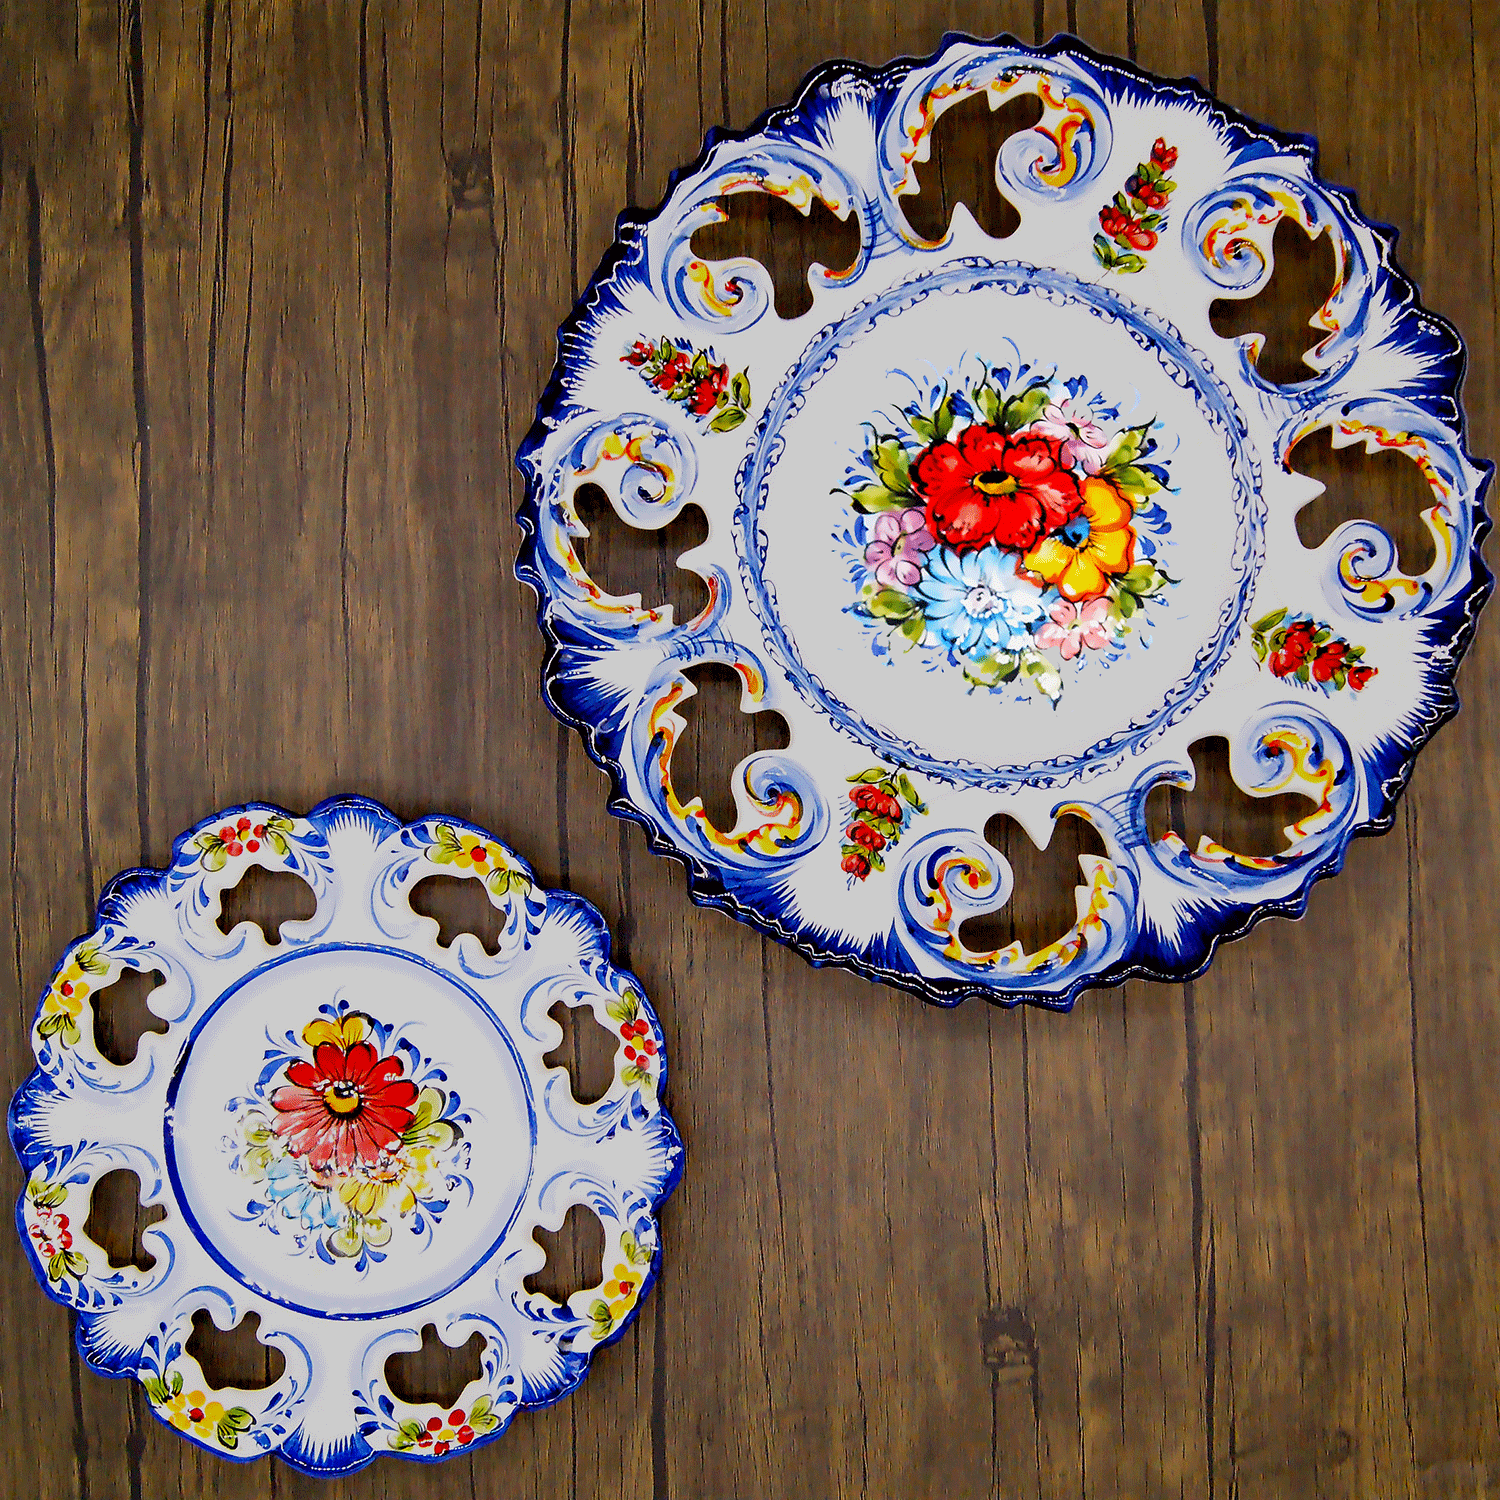 10 Inch Hand painted Portuguese Ceramic Wall Decor Hanging Plate